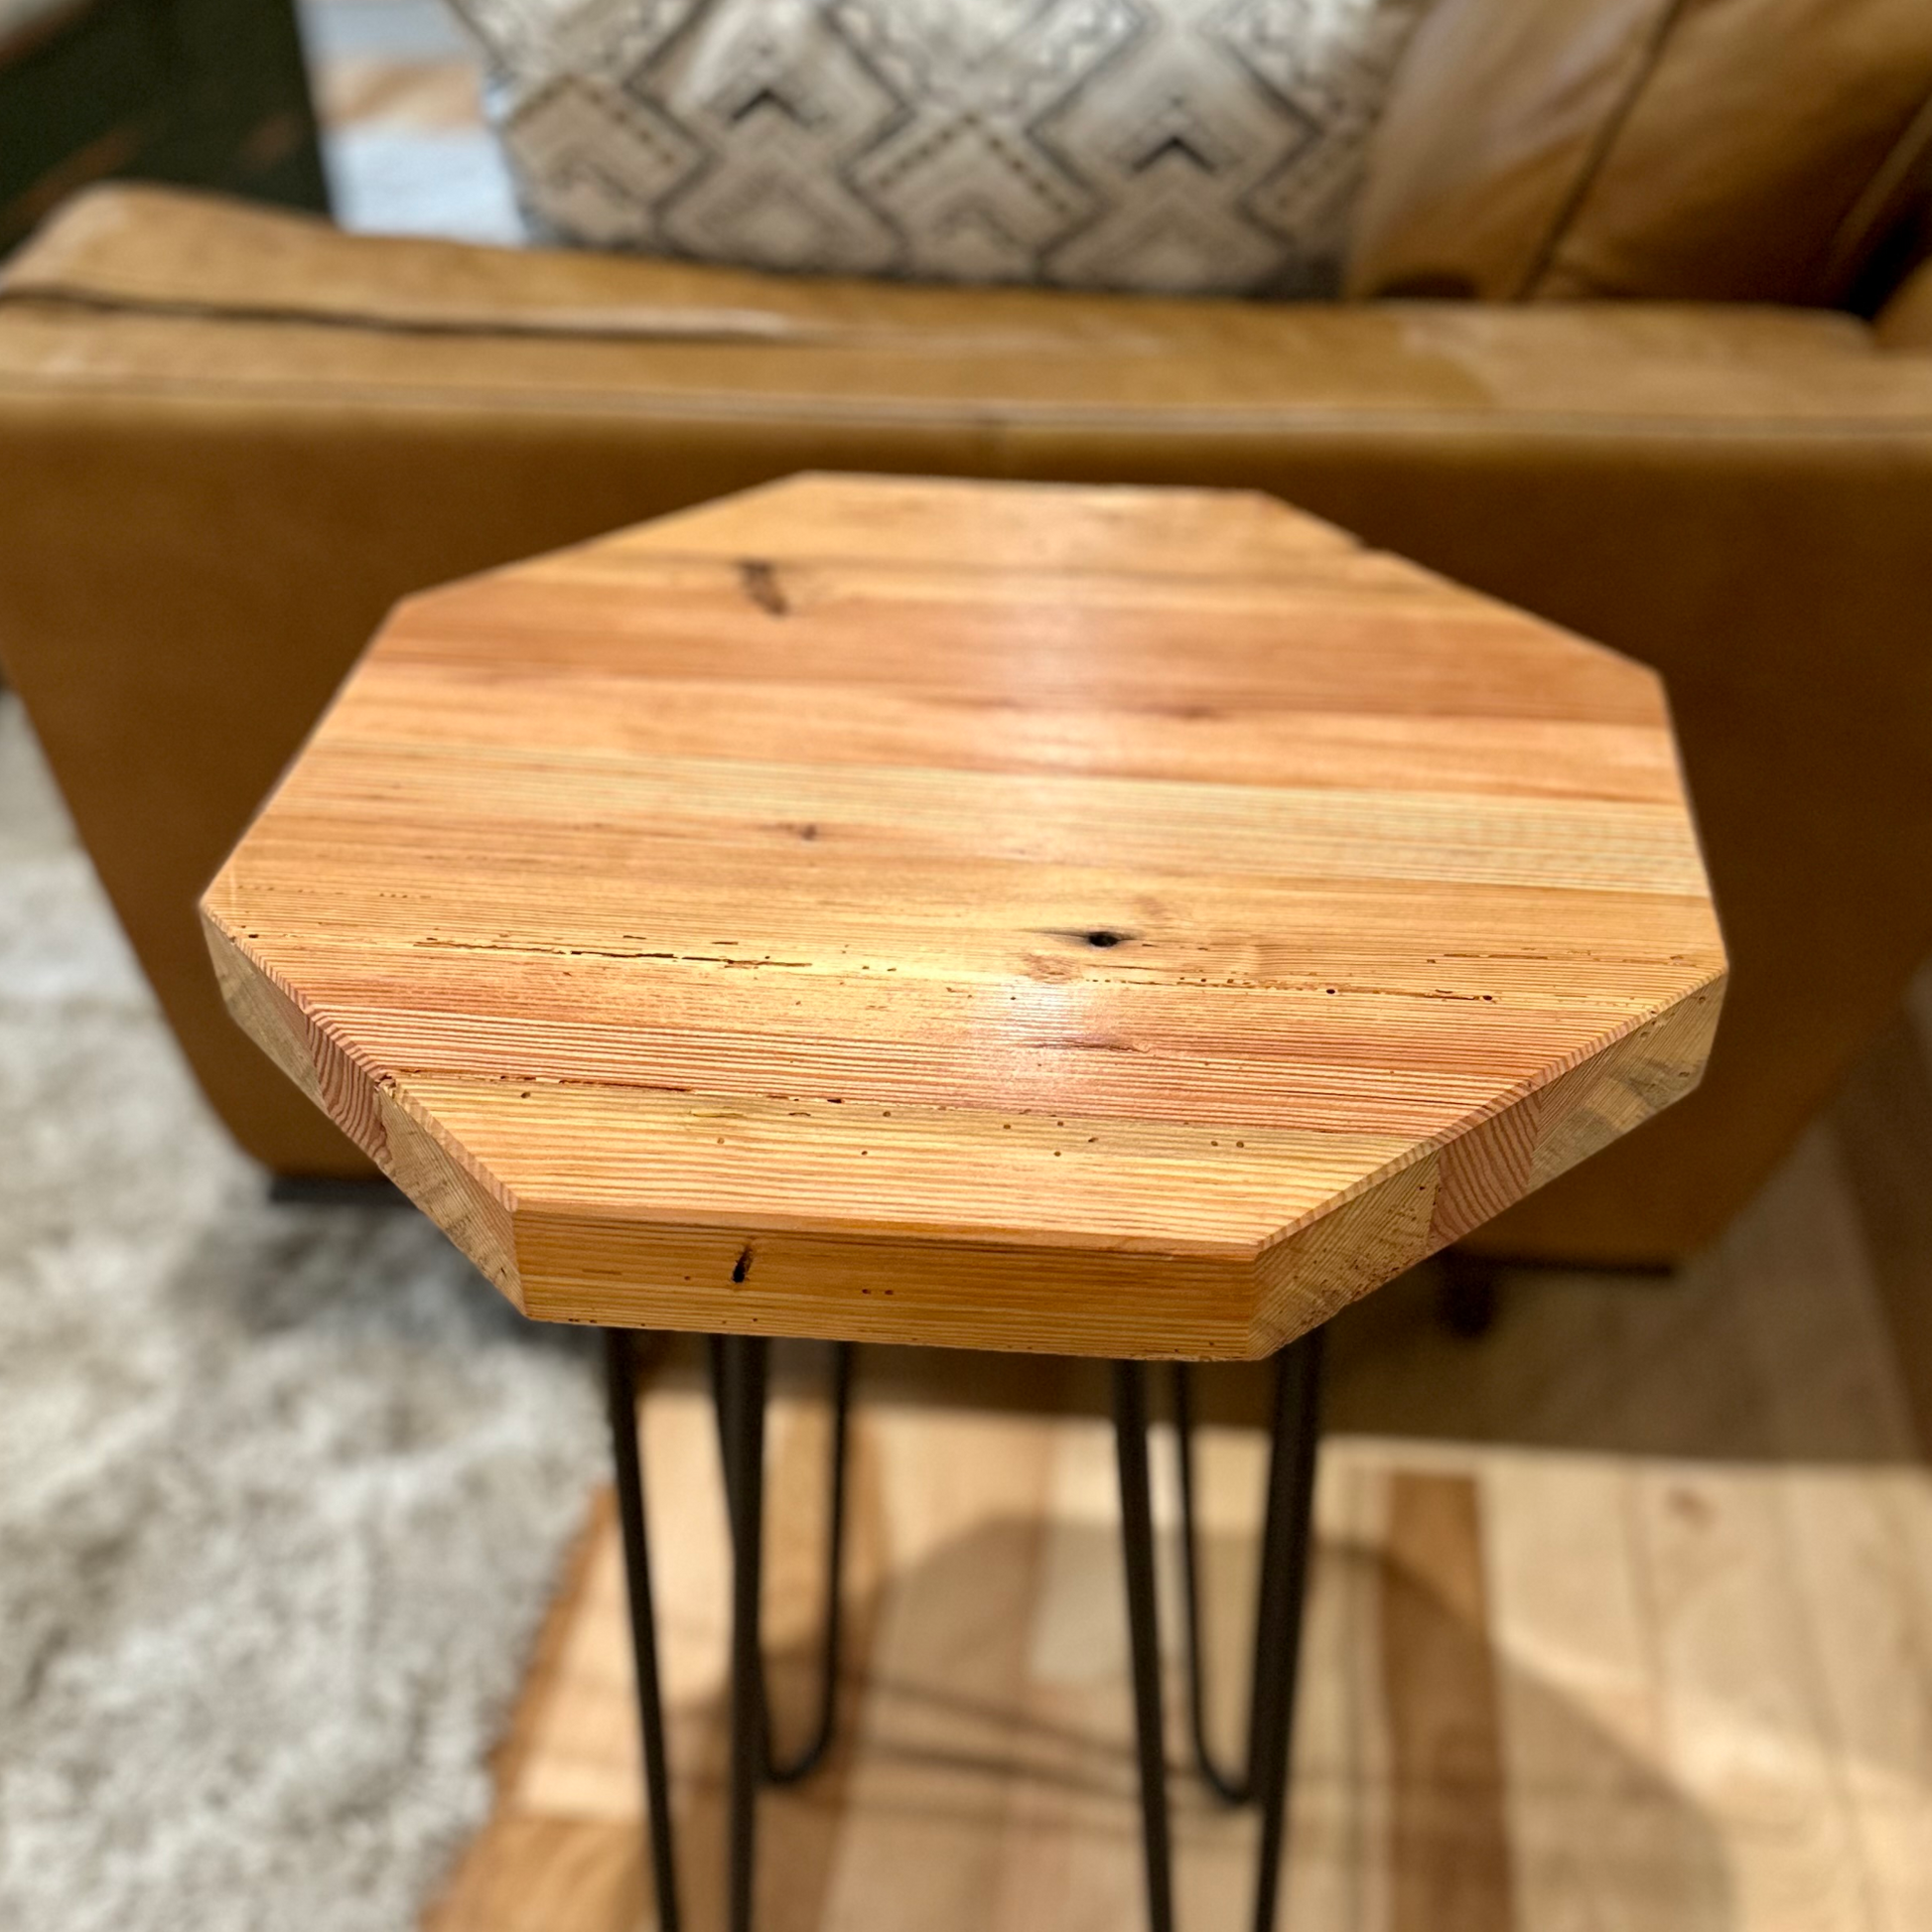 a reclaimed wood table in an octagonal shape and lacquer finish. The table is supported by four hairpin legs and is shown next to a couch as a side table.